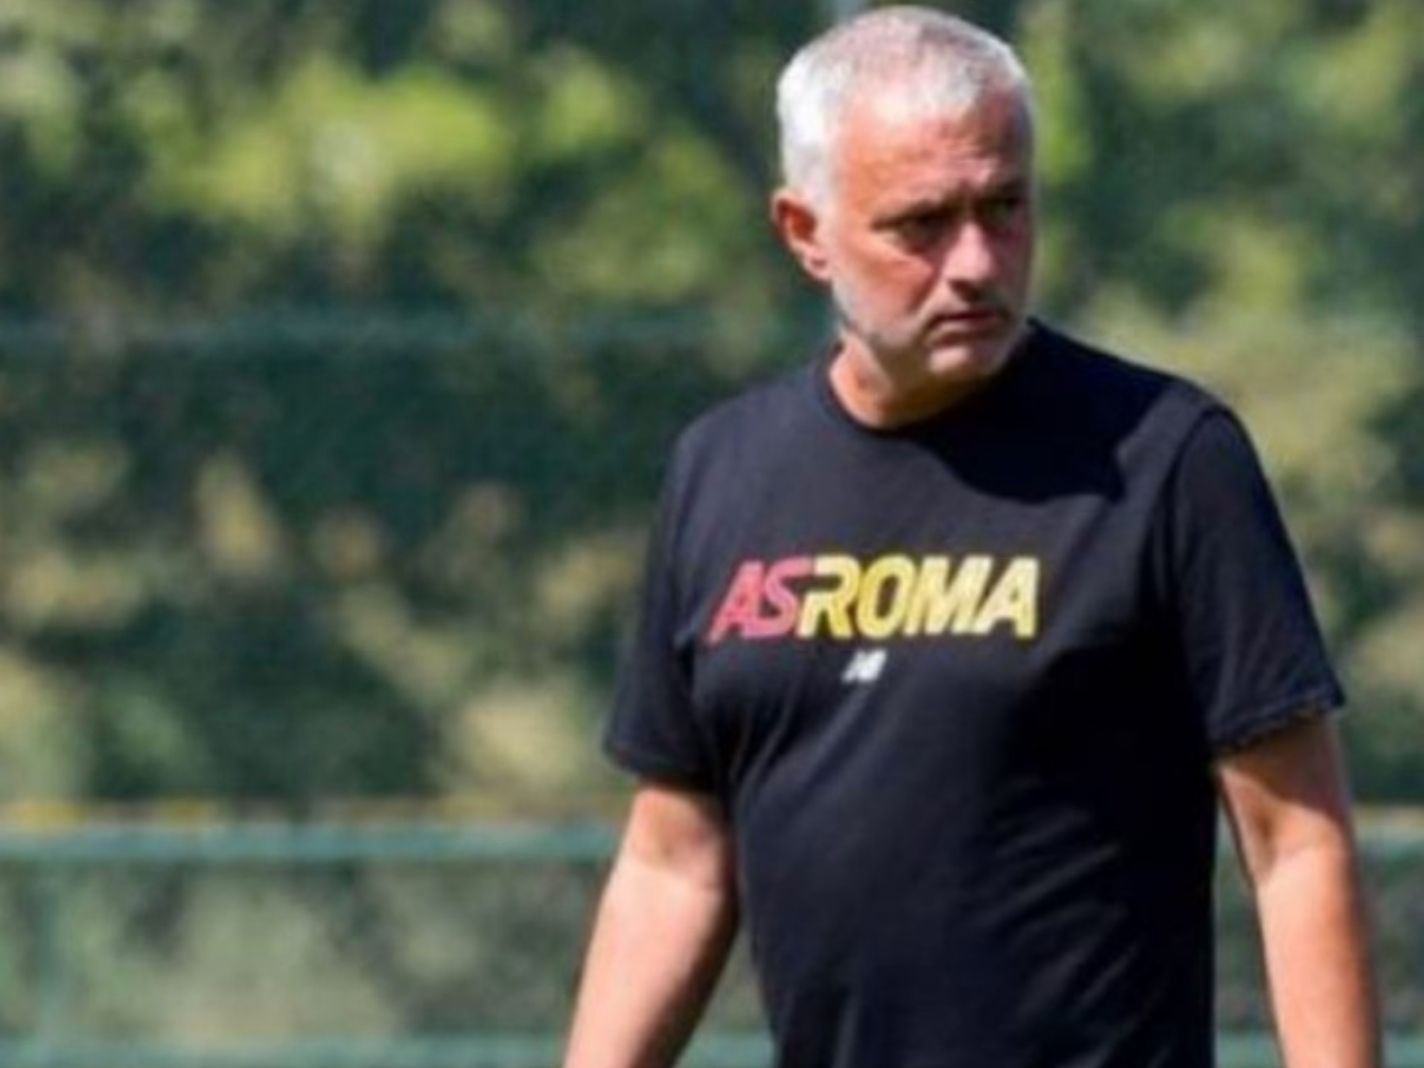 Why Antonio Cassano Hates Jose Mourinho? Their Ongoing Beef Explained